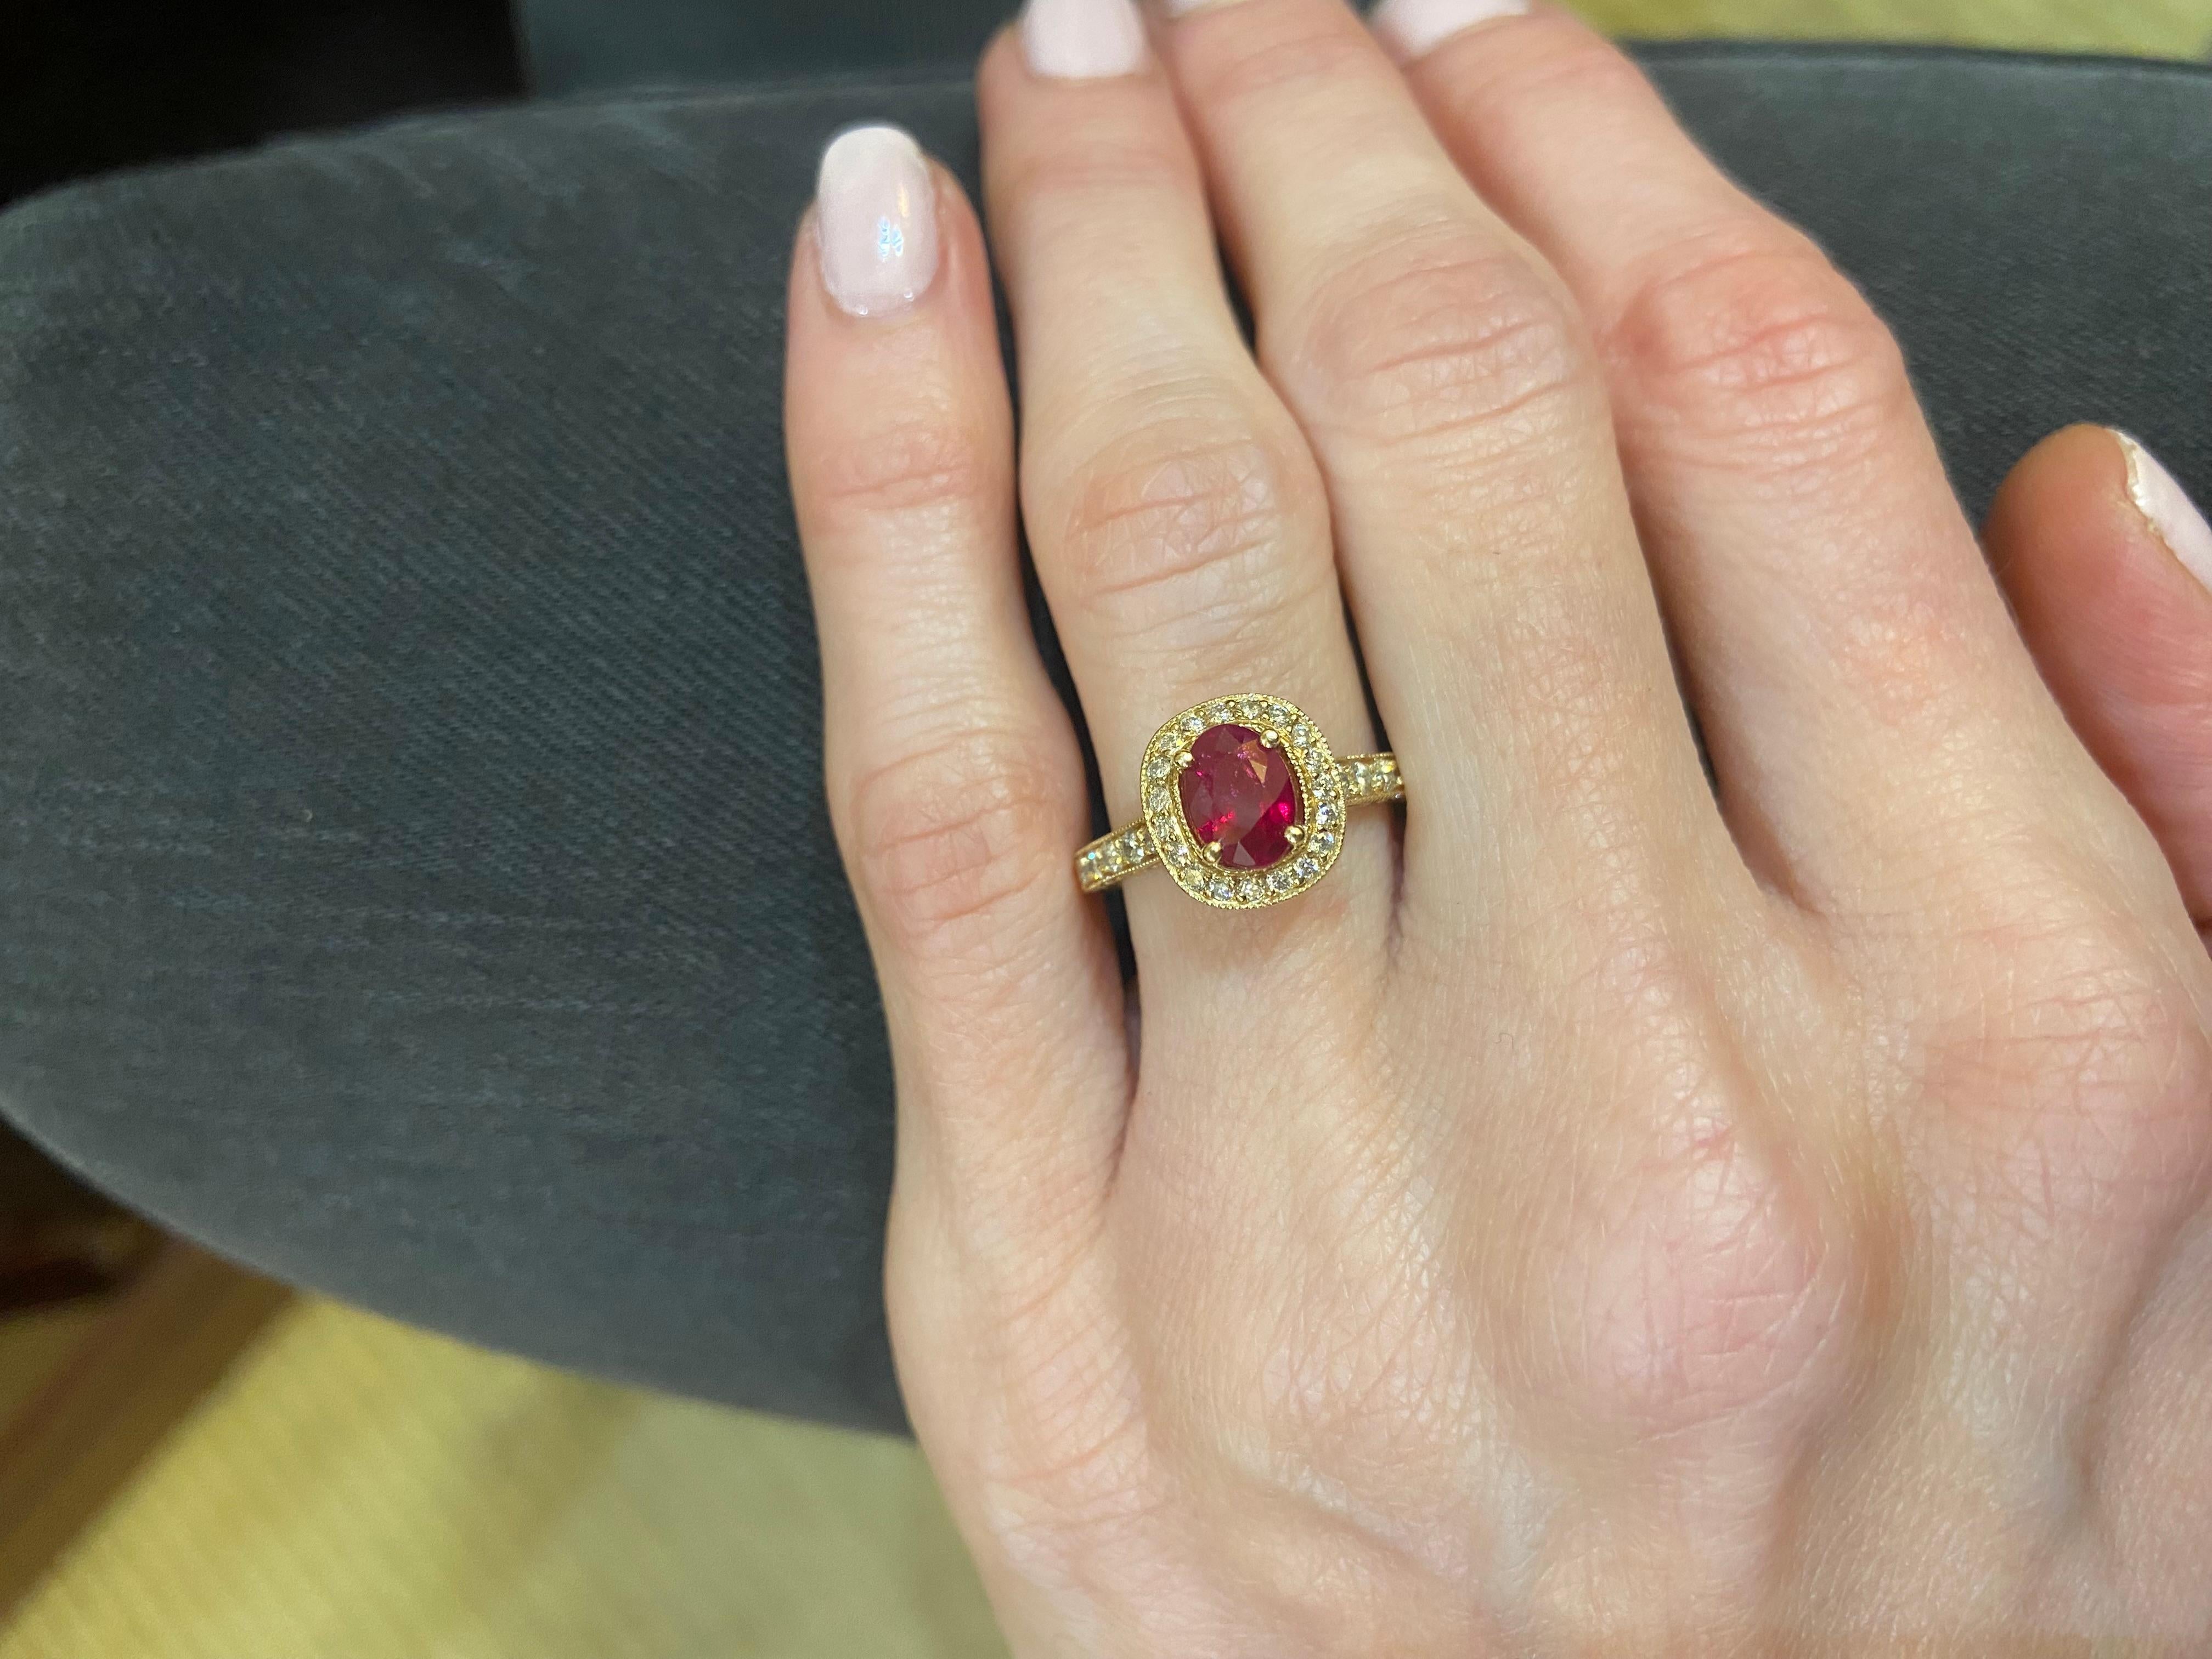 Metal: 14KT Yellow Gold
Finger Size: 6.5
(Size is 6.5, but is sizable upon request)

Number of Oval Rubies: 1
Carat Weight: 1.13ctw
Stone Size: 7 x 5mm

Number of Round Diamonds: 82
Carat Weight: 0.76ctw